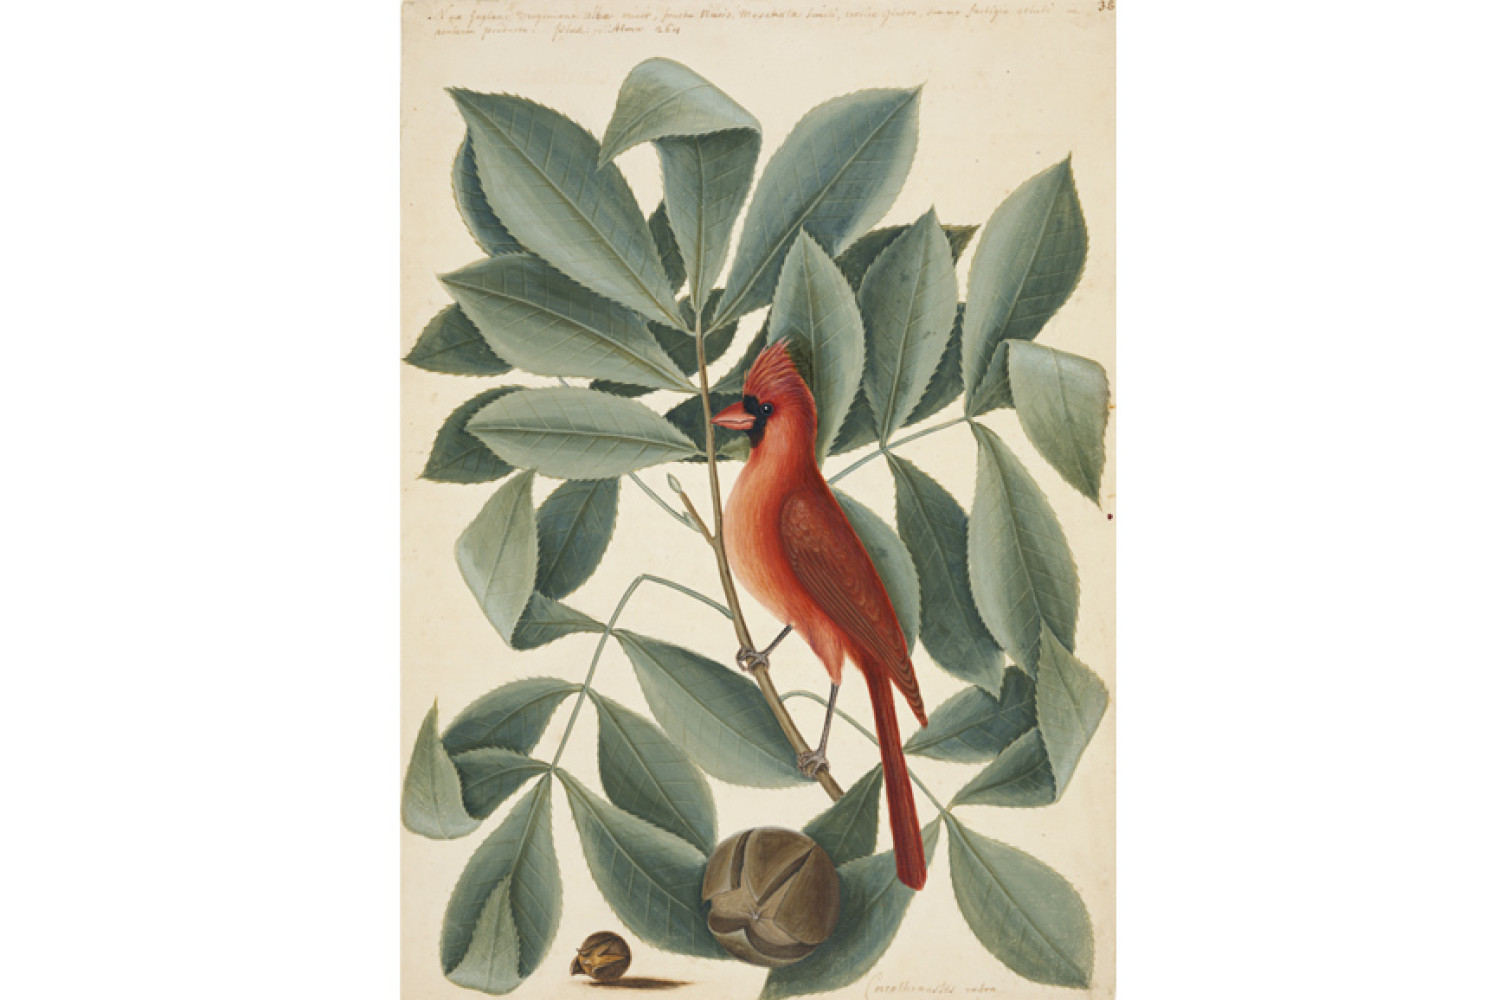 The Red Bird, the Hiccory Tree and the Pignut, ca. 1722—1726, by Mark Catesby (British, 1682—1749); watercolor and bodycolor heightened with gum Arabic; Royal Collection Trust/© Her Majesty Queen Elizabeth II 2017